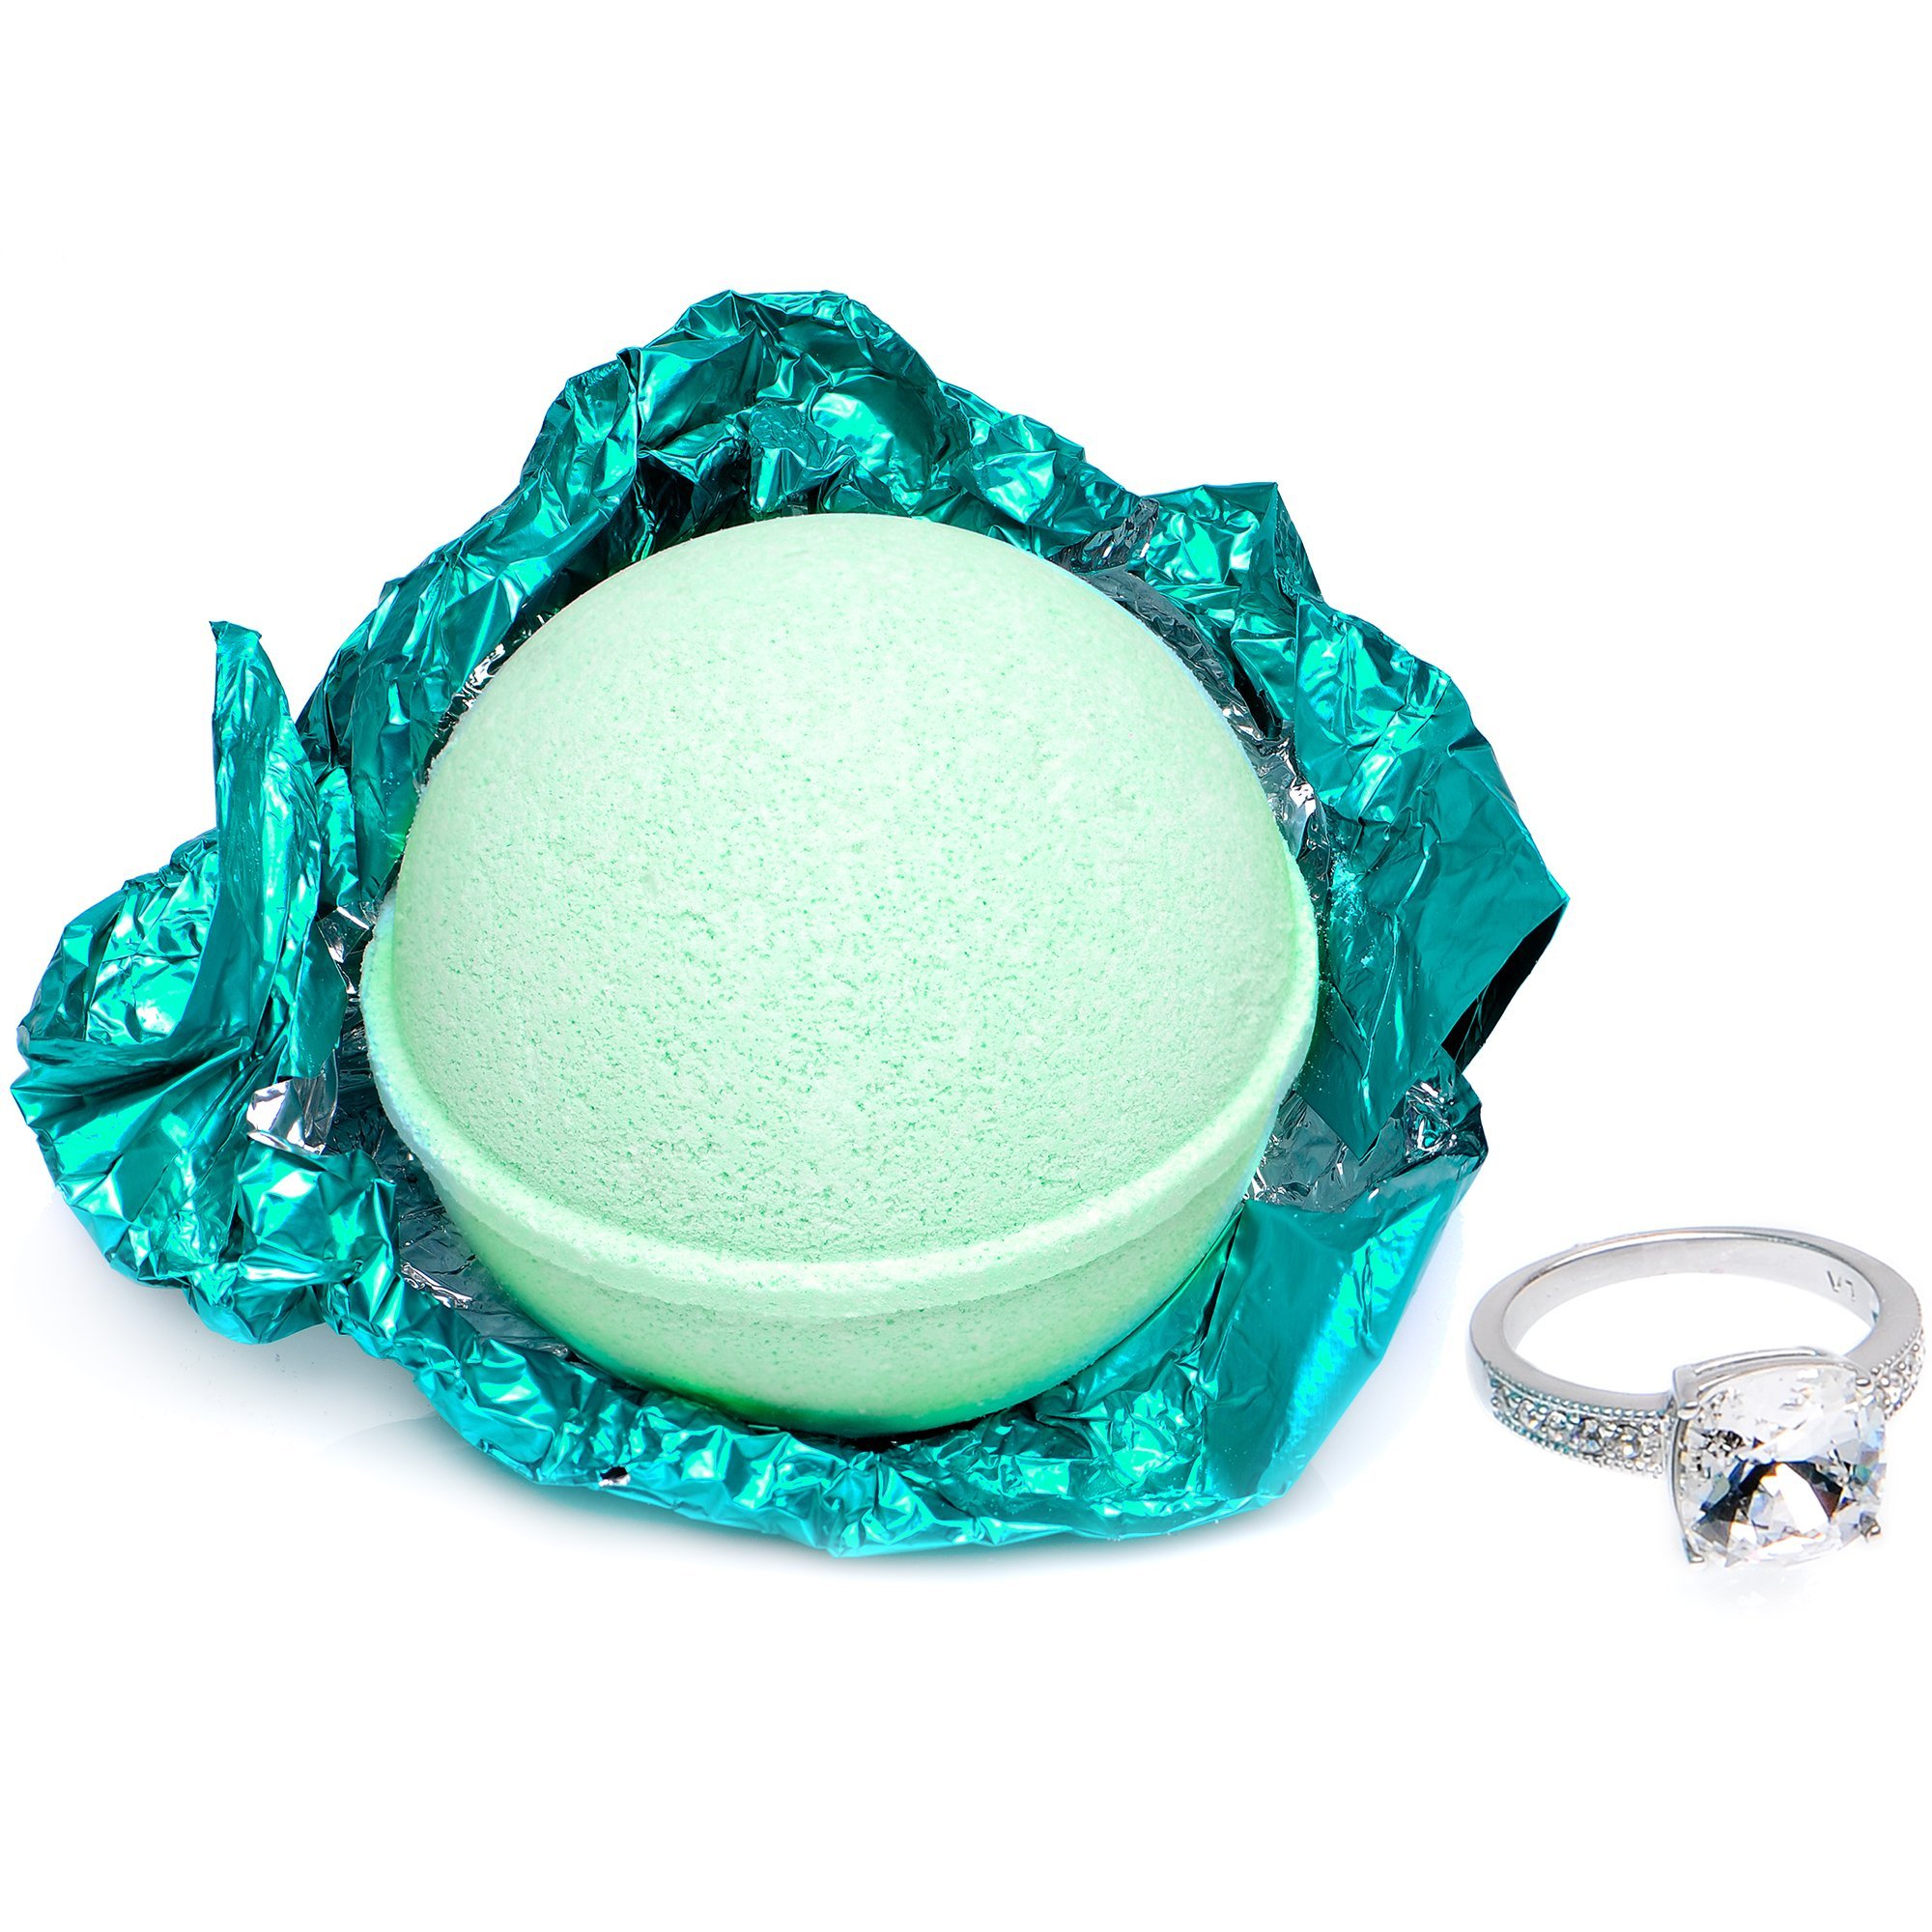 Jackpot Candles Bath Bomb with Ring Surprise Inside Mermaid Daydream Extra Large Made in USA - image 4 of 9